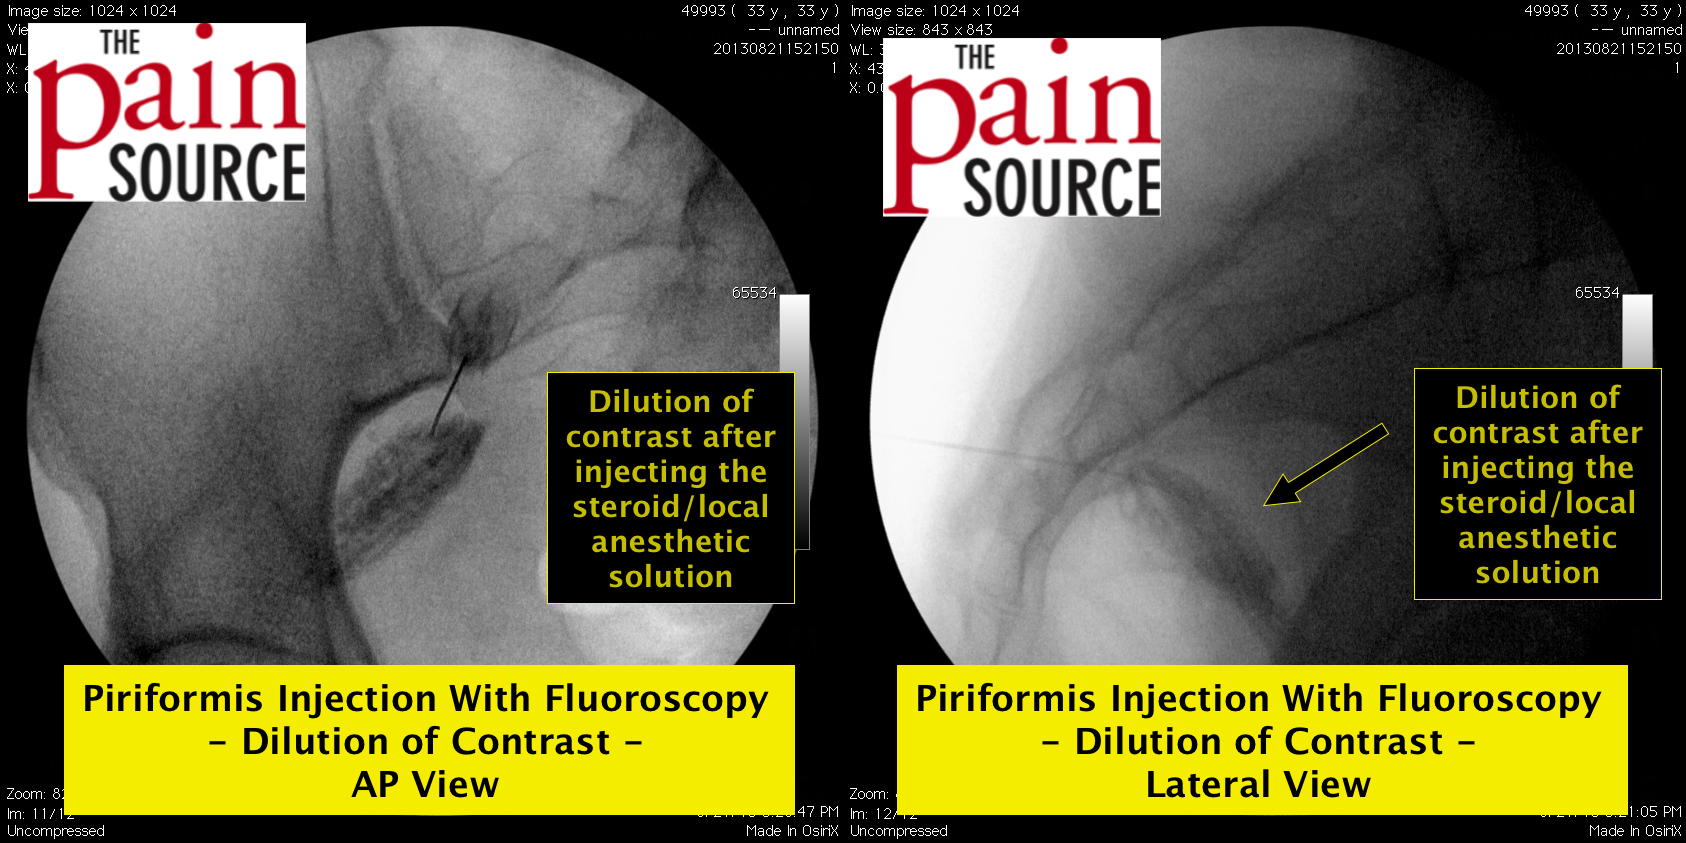 https://thepainsource.com/wp-content/uploads/2013/08/Piriformis-injection-with-fluoroscopy-AP-and-lateral-views.jpg